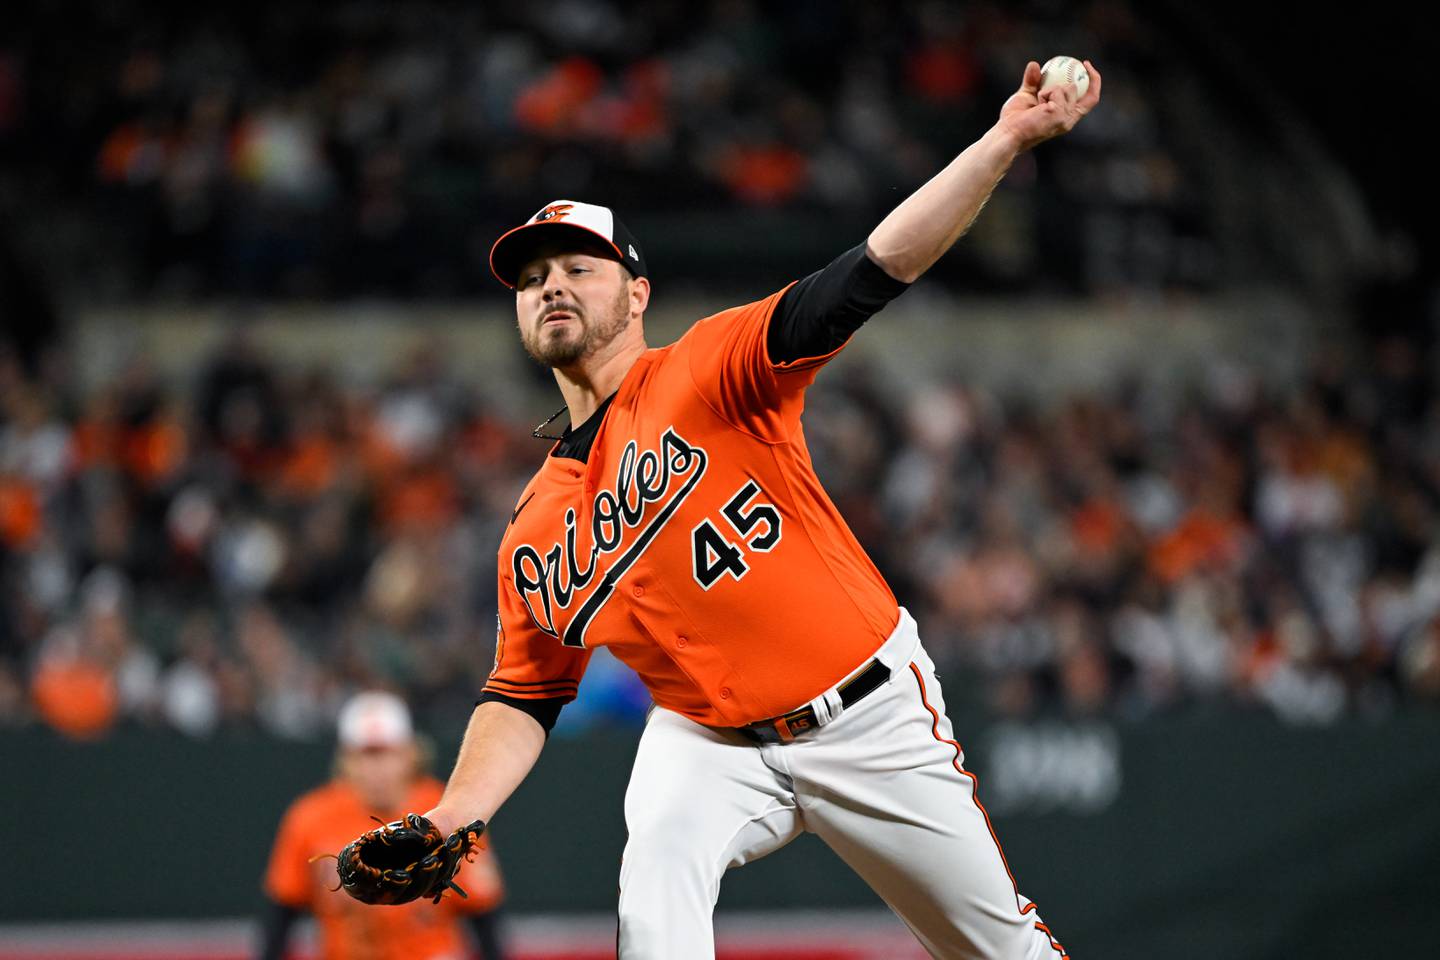 Baltimore Orioles relief pitcher Keegan Akin (45) throws during the eighth inning of an baseball game against the New York Yankees, Saturday, April 8, 2023, in Baltimore.